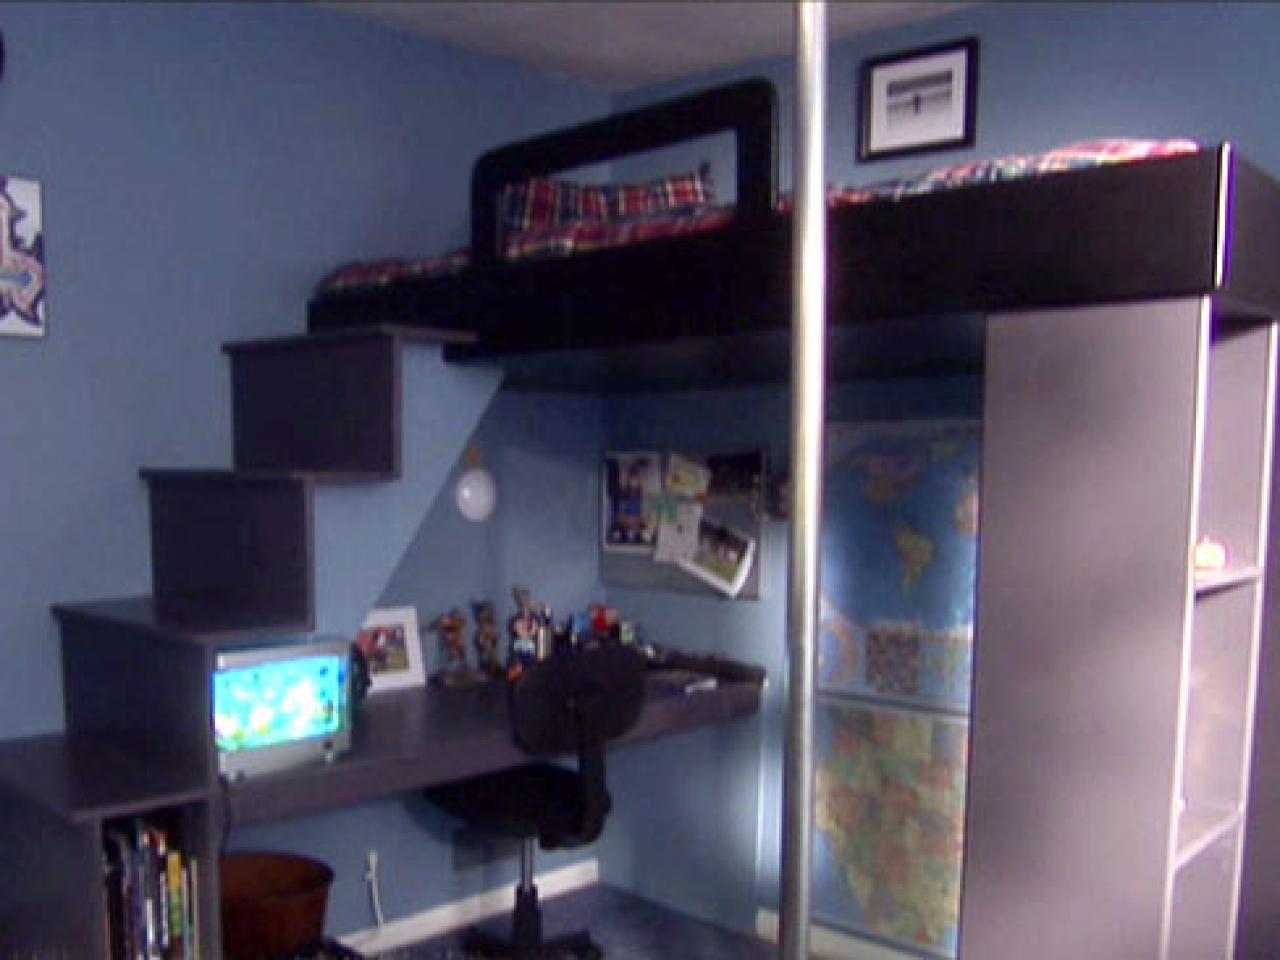 full loft bed with desk underneath